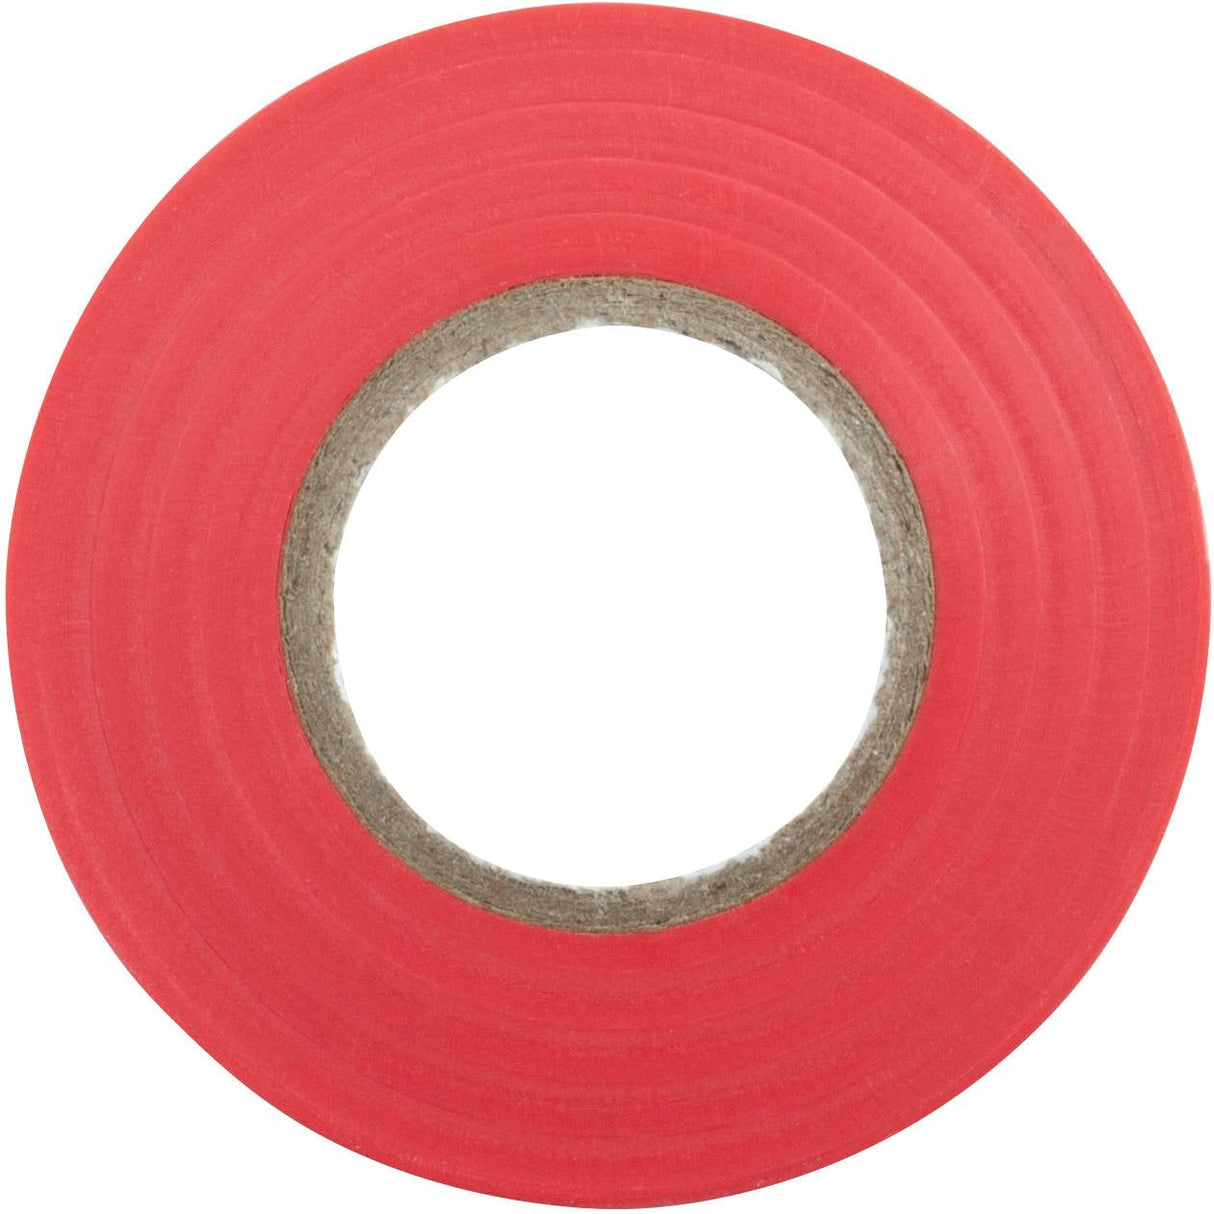 Insulation Tape, Width: 19mm x Length: 20m - S.4506 - Farming Parts